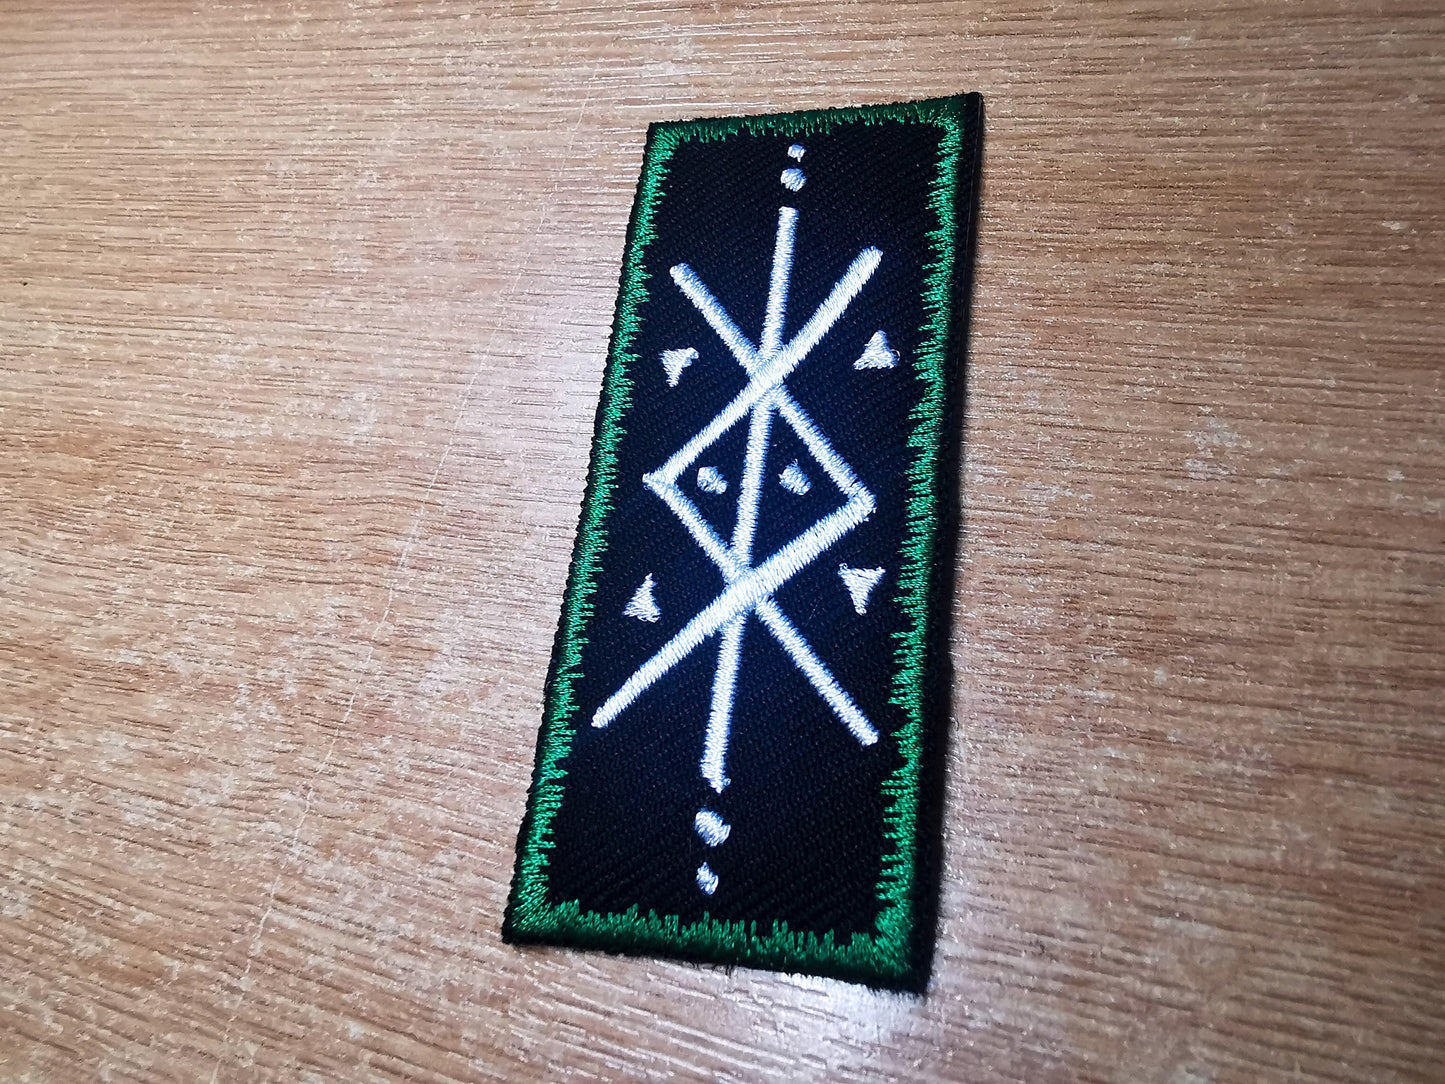 Protection Bindrune Jade Green Viking Patch Iron On Embroidered Norse Heathenry Bind Runes